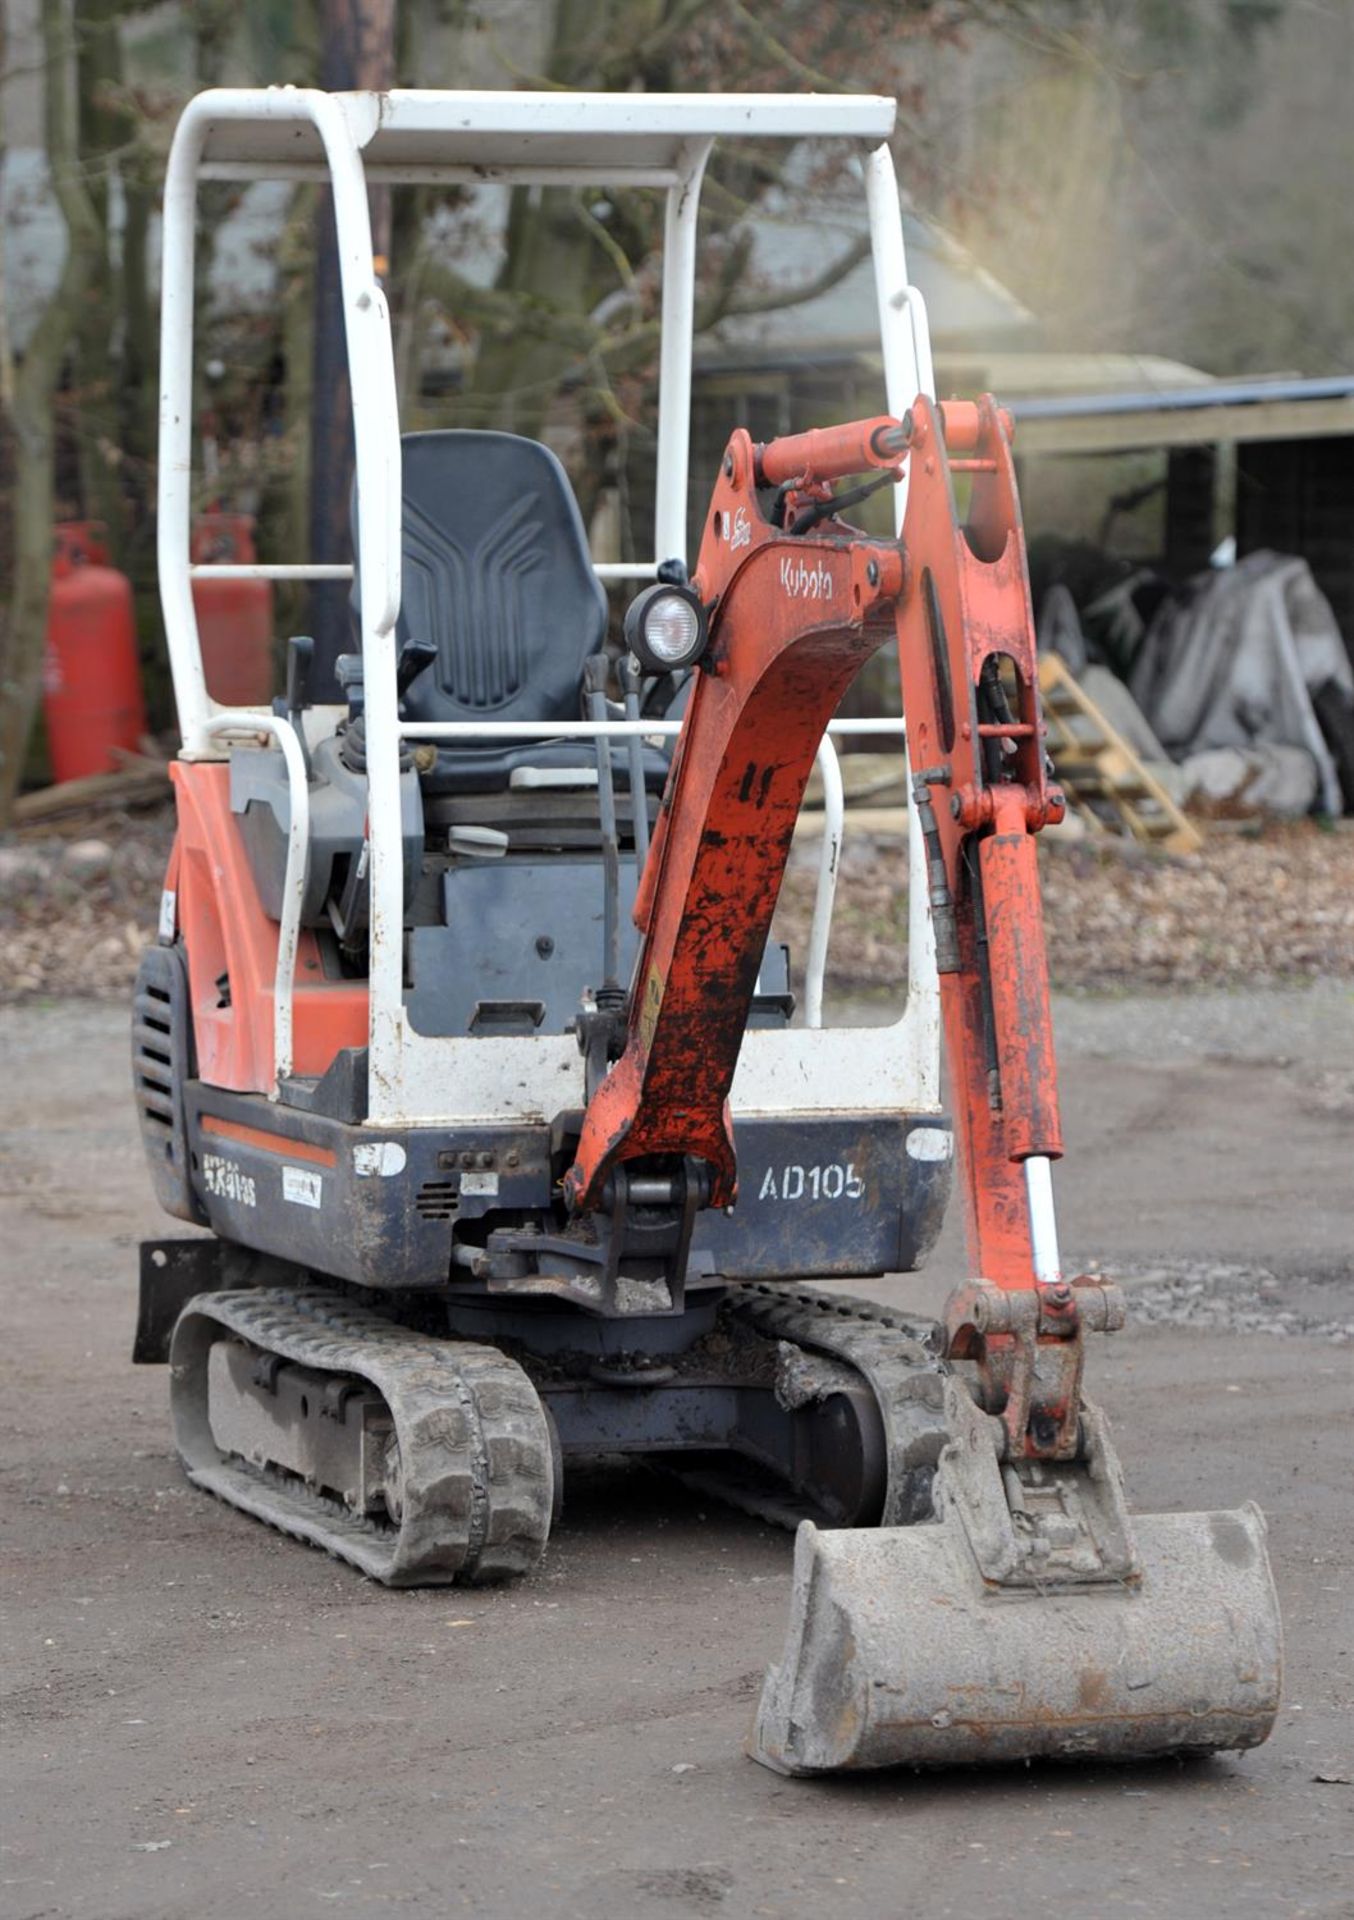 Kubota 1.5 ton digger KX413S. This mini digger comes in working order with its 3 digger buckets it - Image 2 of 10